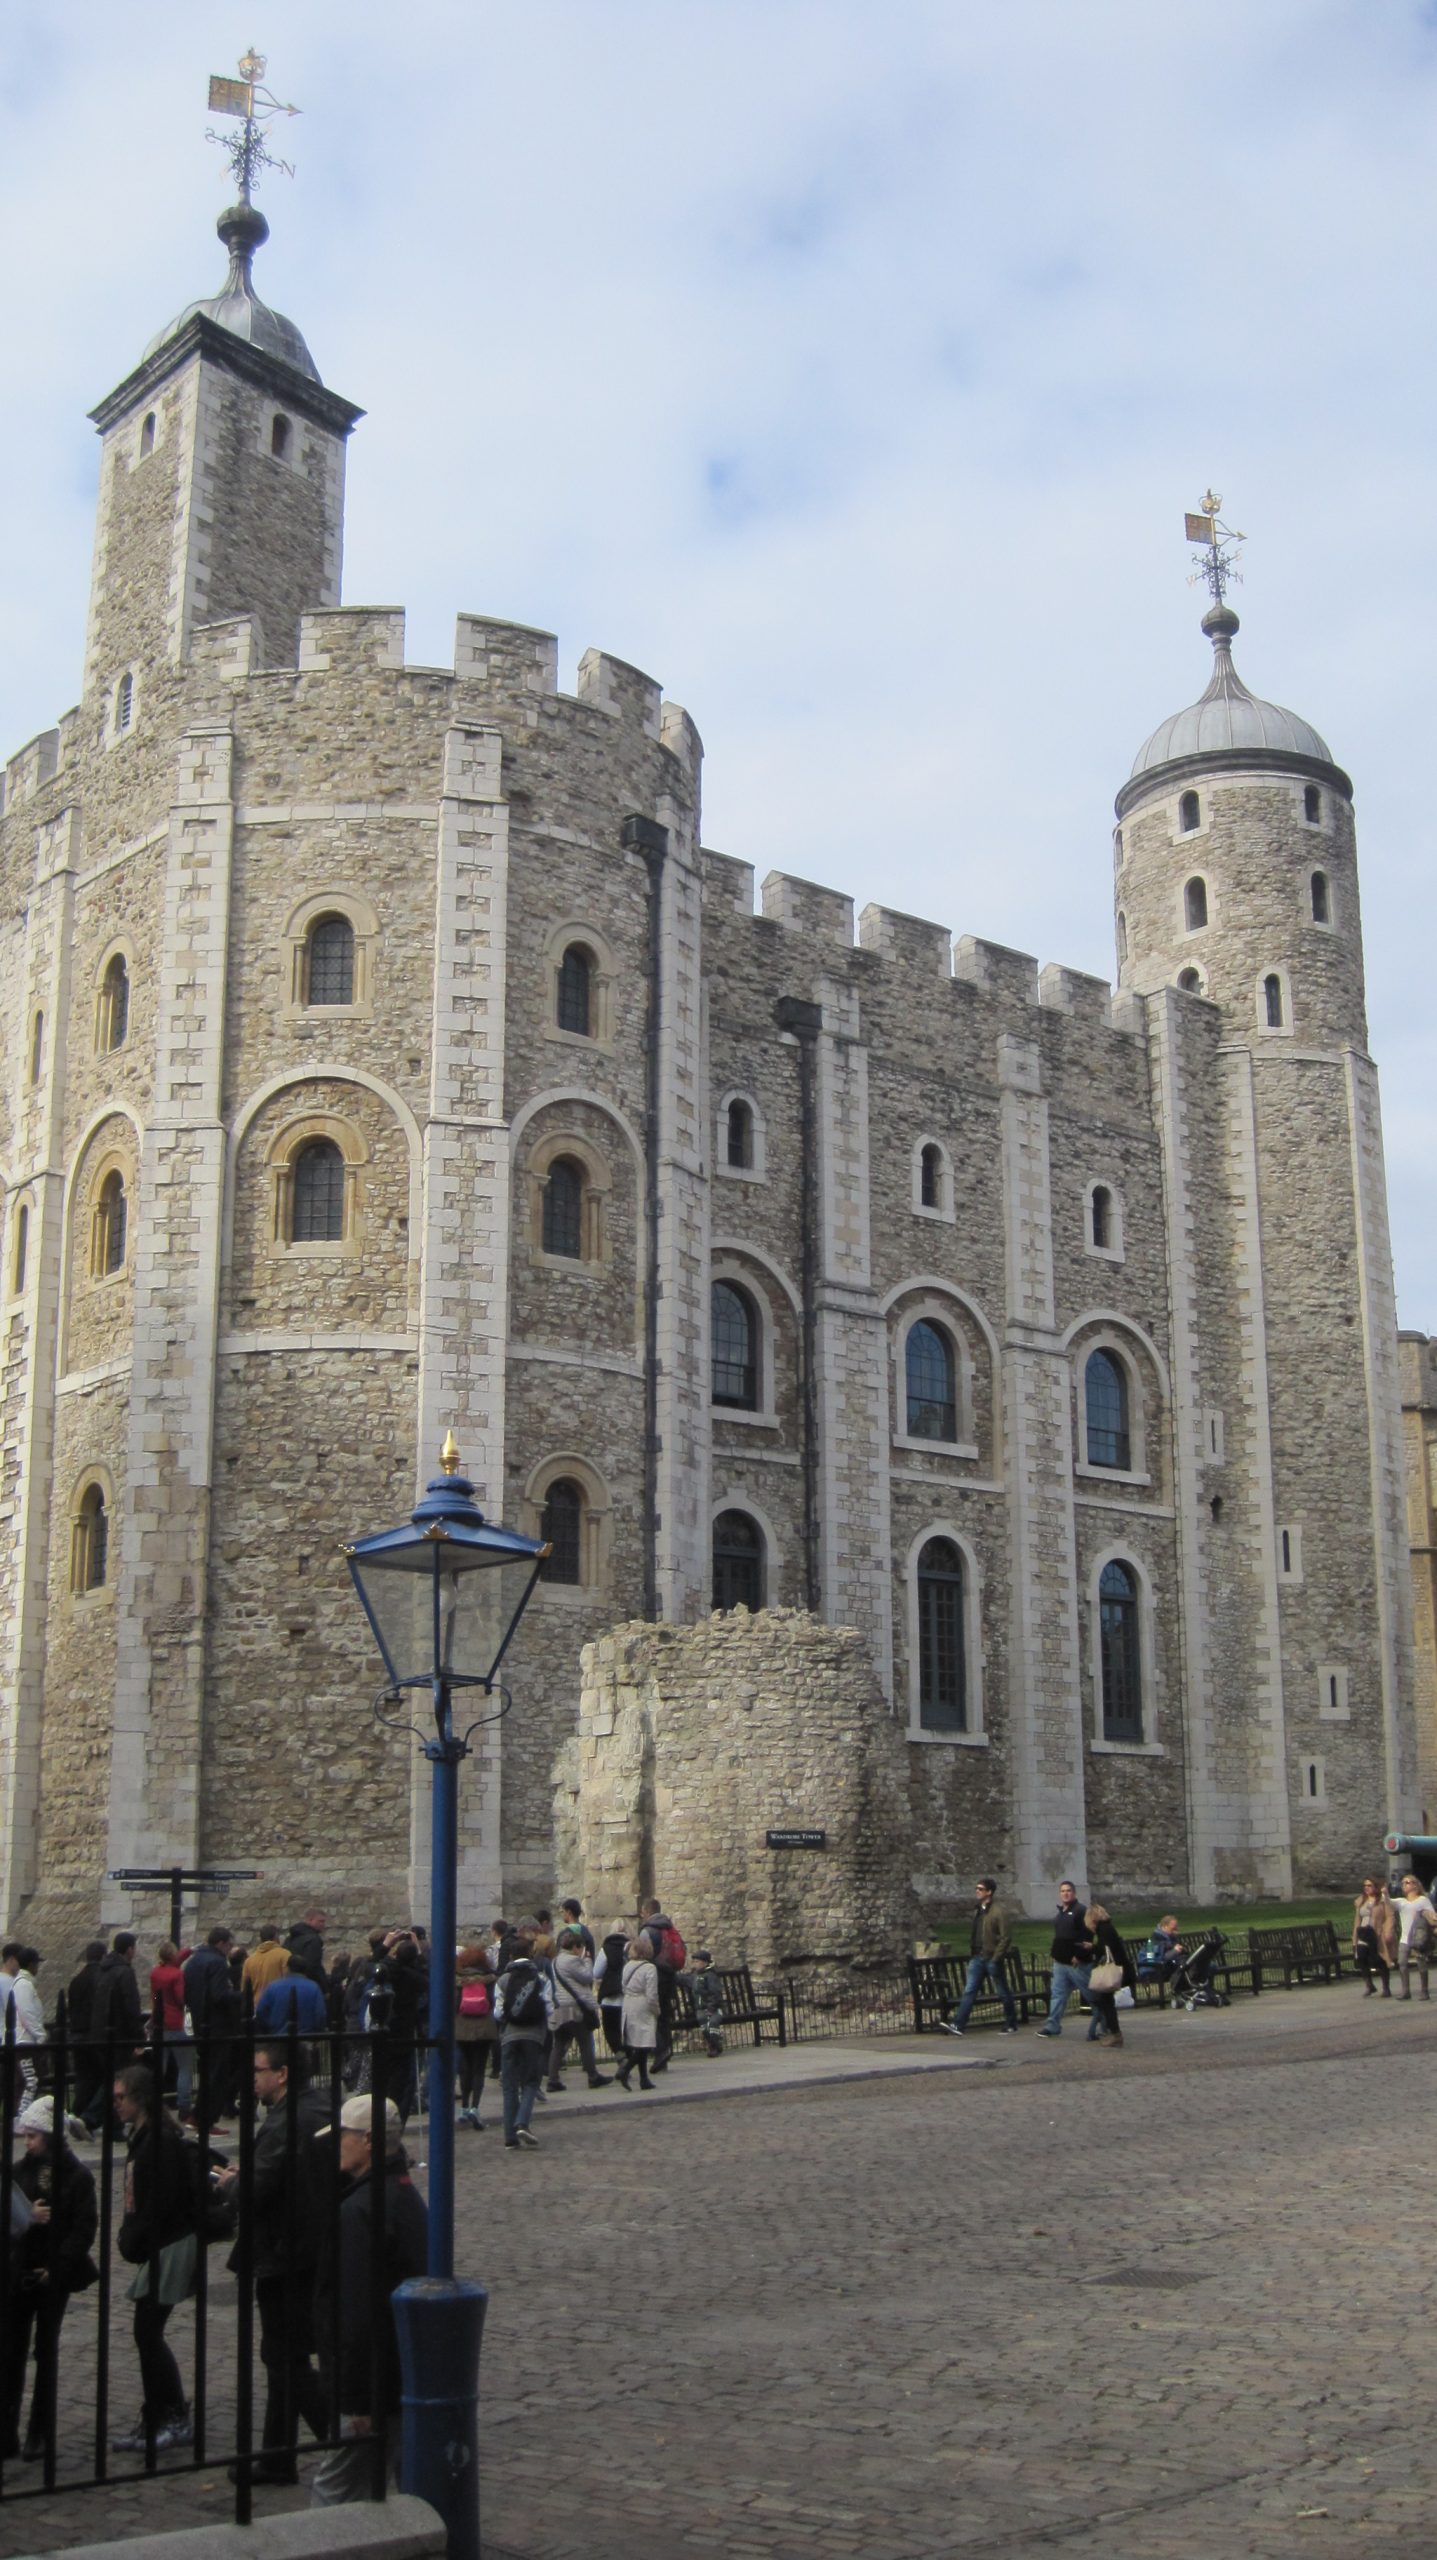 Tower of London - photo by Juliamaud